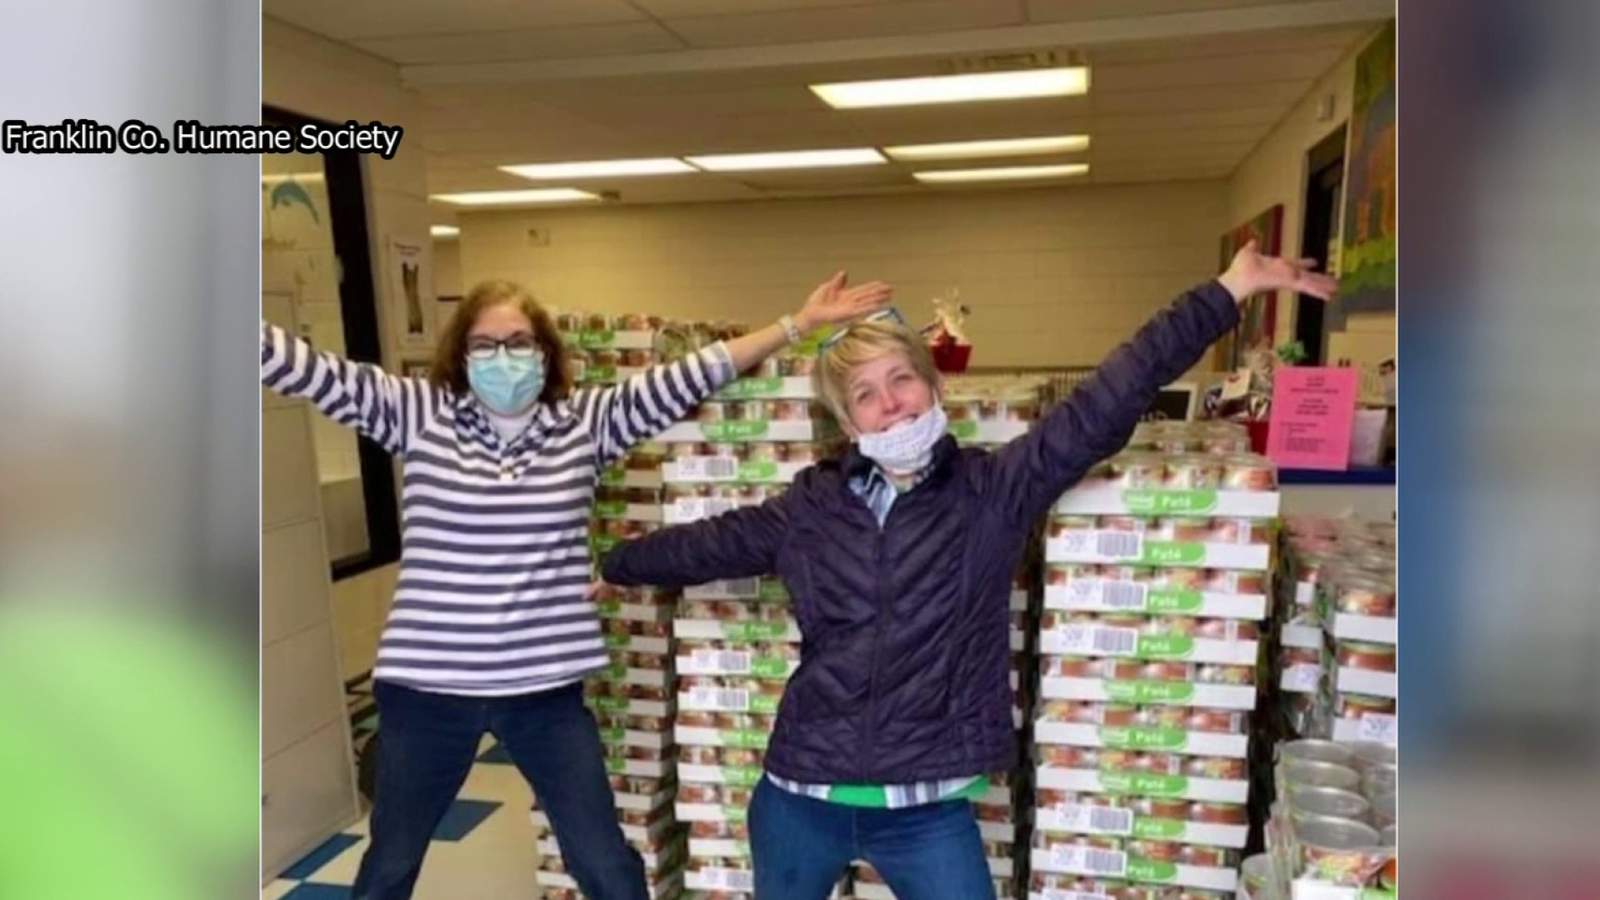 Purina donates nearly 300 cases of cat food to the Franklin County Humane Society